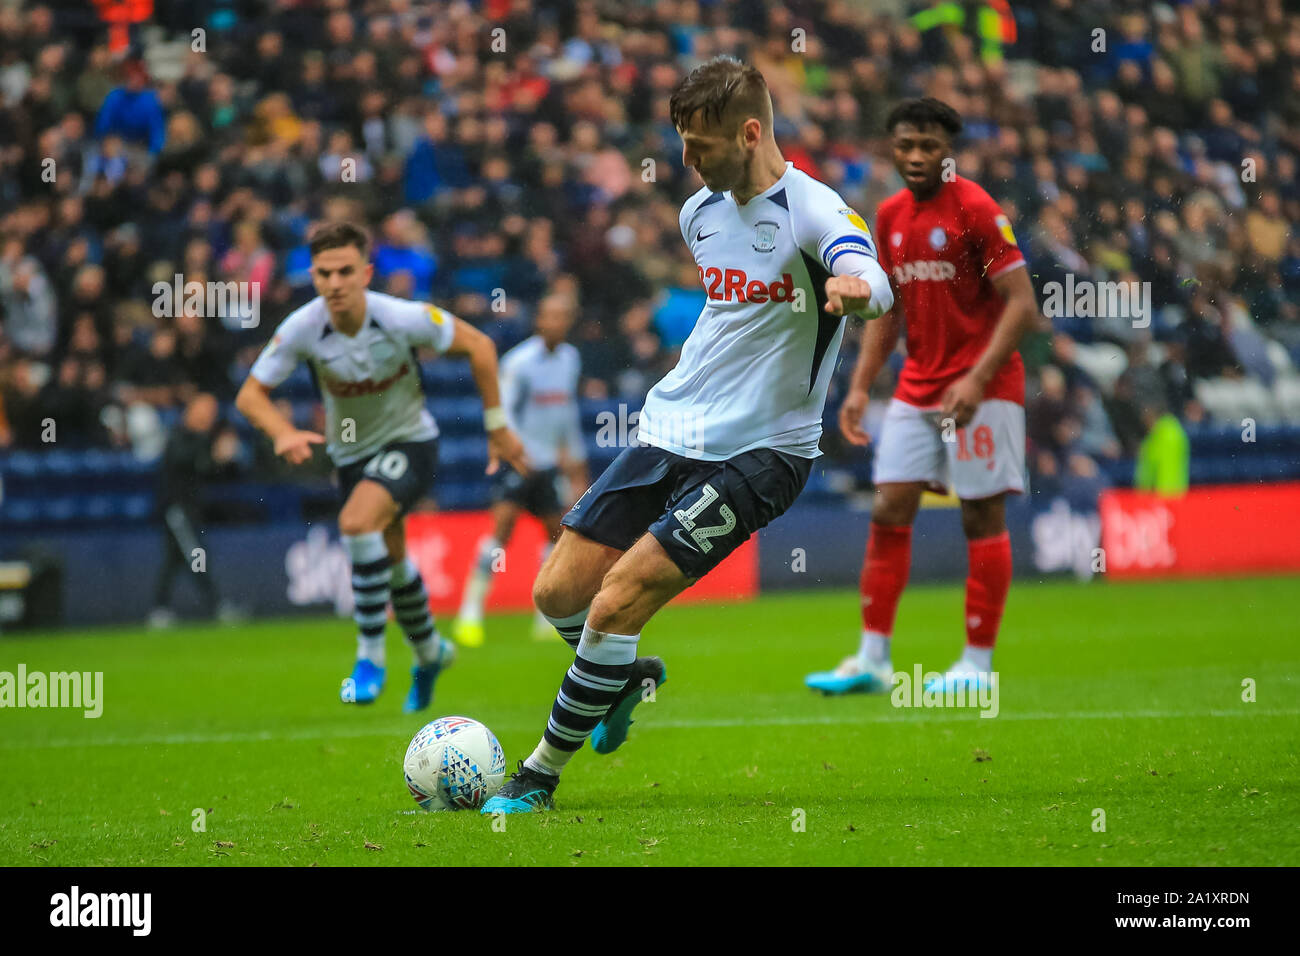 28th September 2019, Deepdale, Preston, England; Sky Bet Championship, Preston North End v Bristol City : Paul Gallagher (12) of Preston North End scores a penalty to make it 1-2 Credit: Craig Milner/News Images Stock Photo